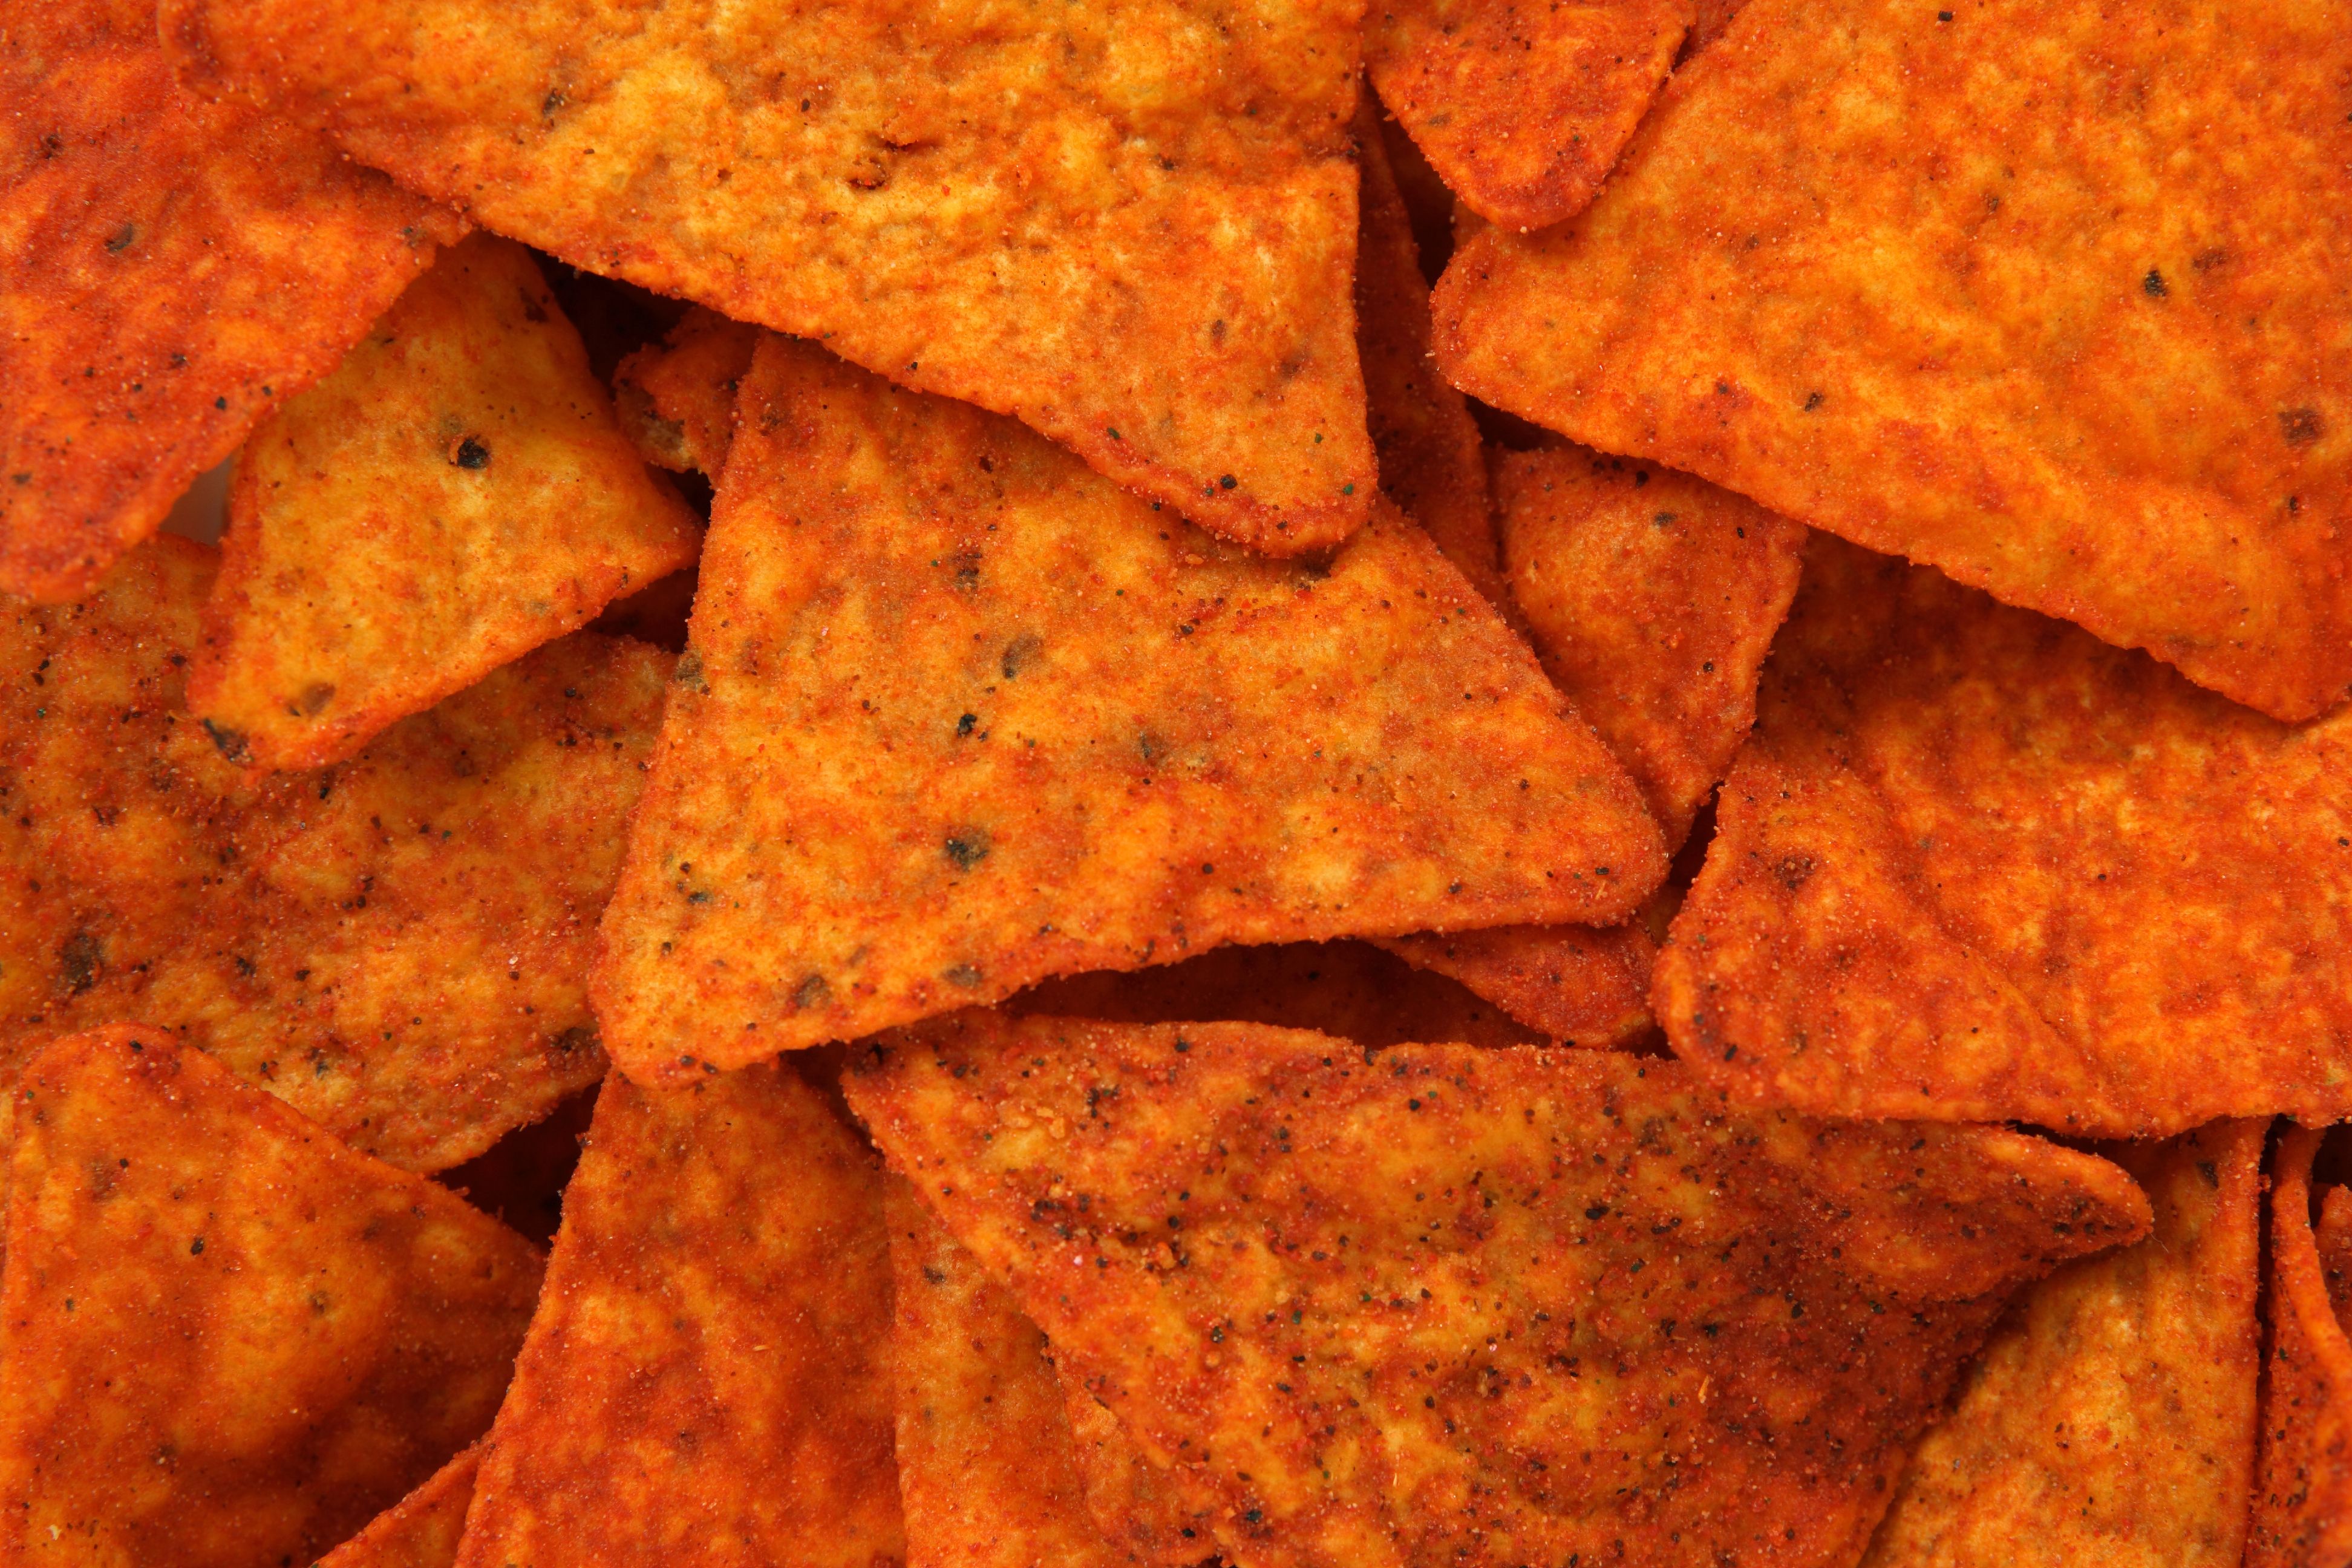 Free download Lady Friendly Doritos Did Not Go Over Well on the Internet Time [3888x2592] for your Desktop, Mobile & Tablet. Explore Doritos Background. Doritos Wallpaper